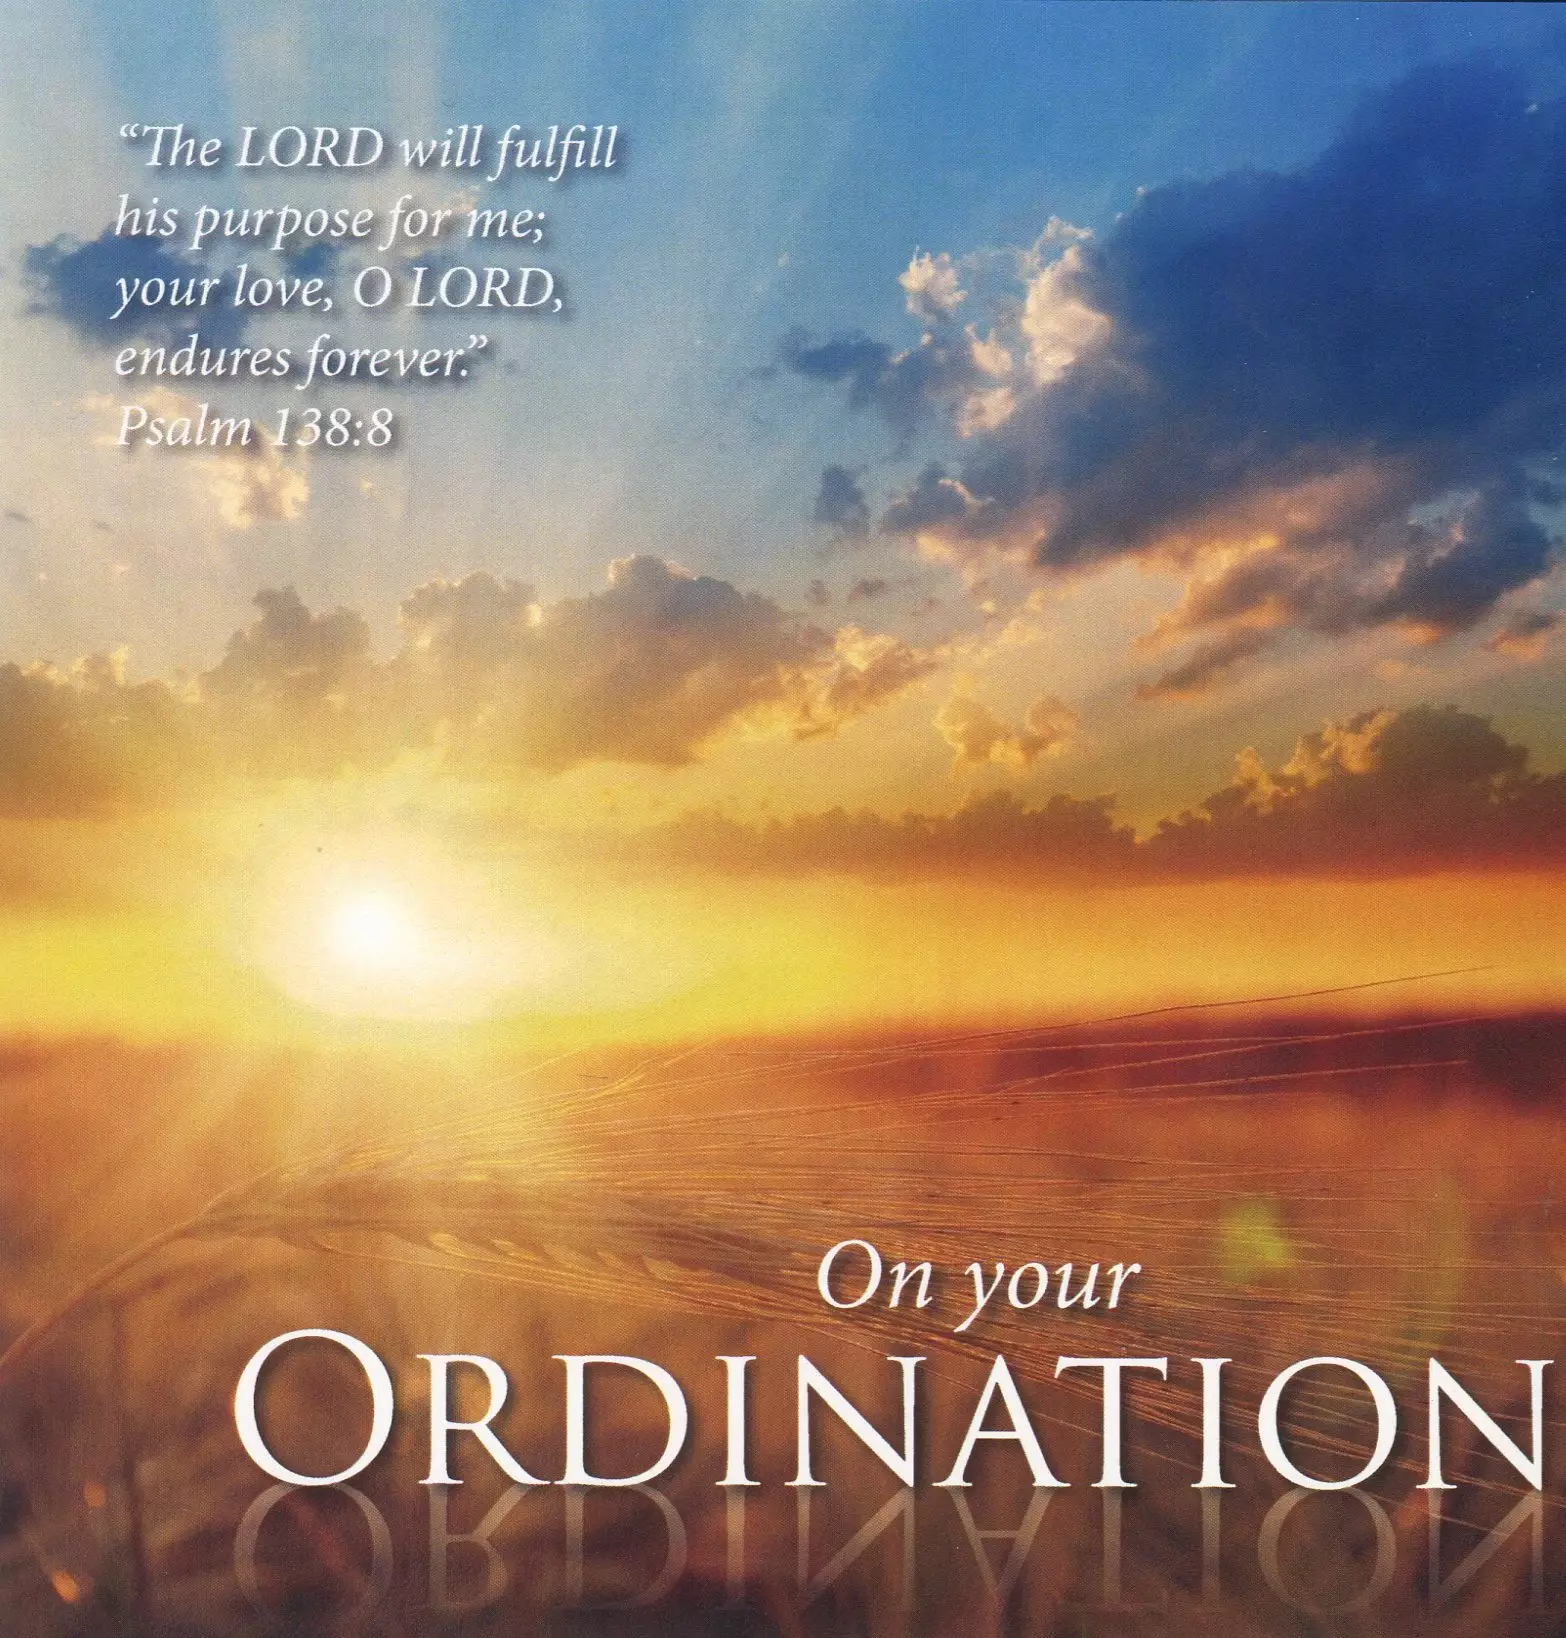 On Your Ordination - Single Card